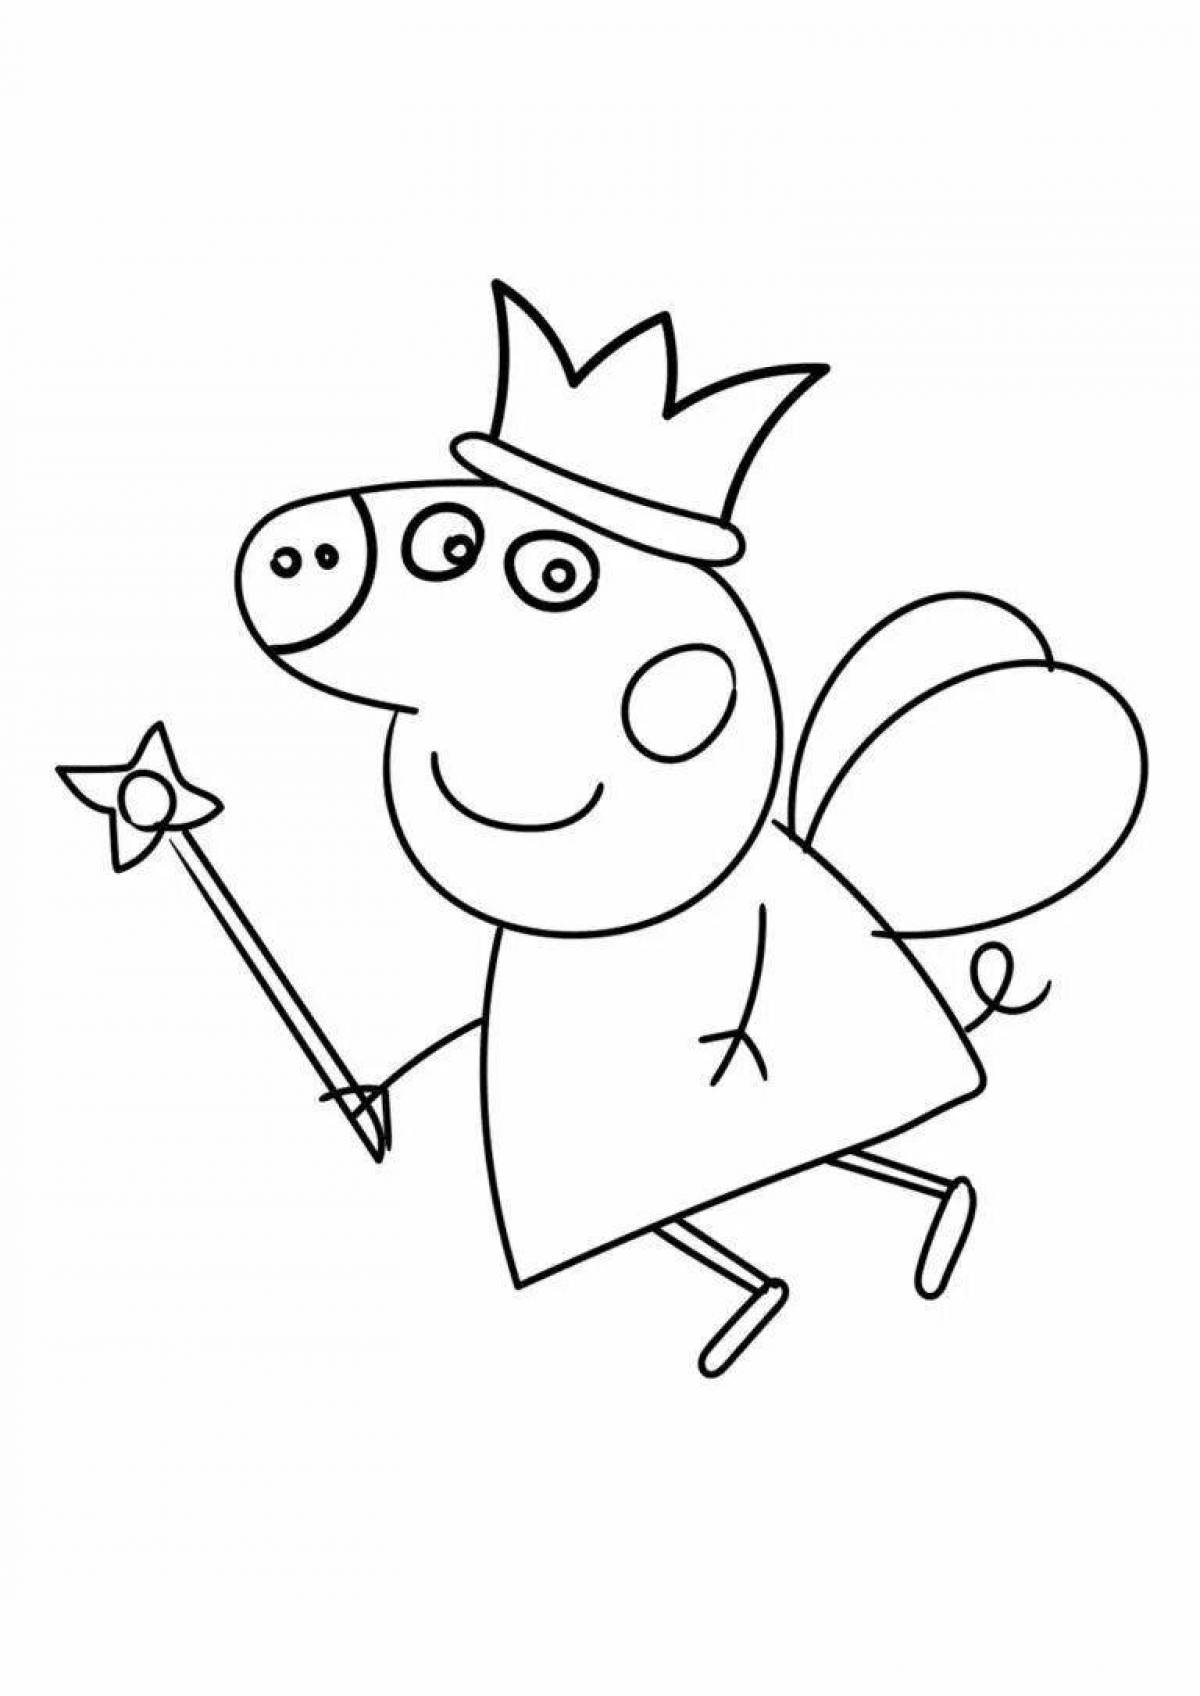 Live coloring fairy pig peppa